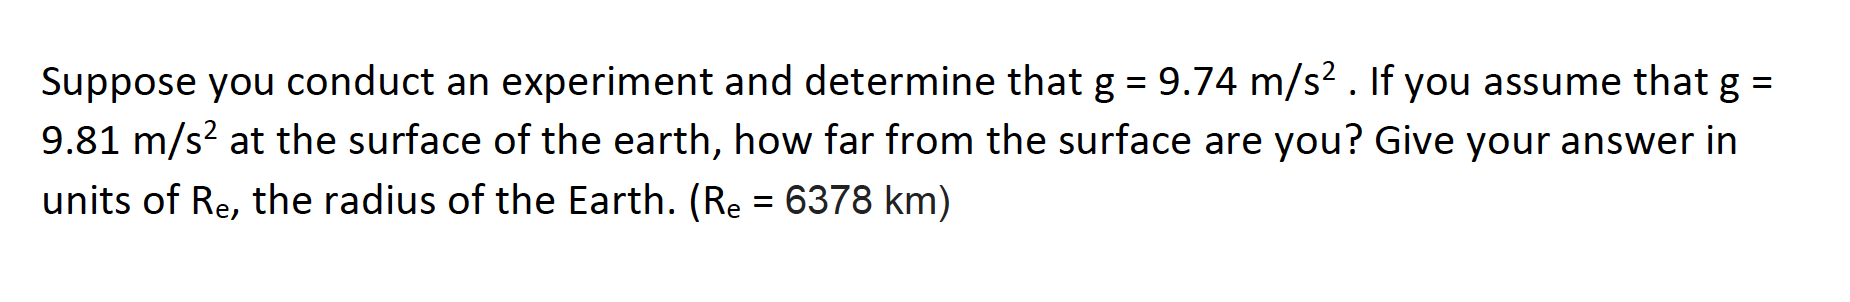 Suppose you conduct an experiment and determine that g = 9.74 m/s² . If you assume that g =
9.81 m/s? at the surface of the earth, how far from the surface are you? Give your answer in
units of Re, the radius of the Earth. (Re = 6378 km)
